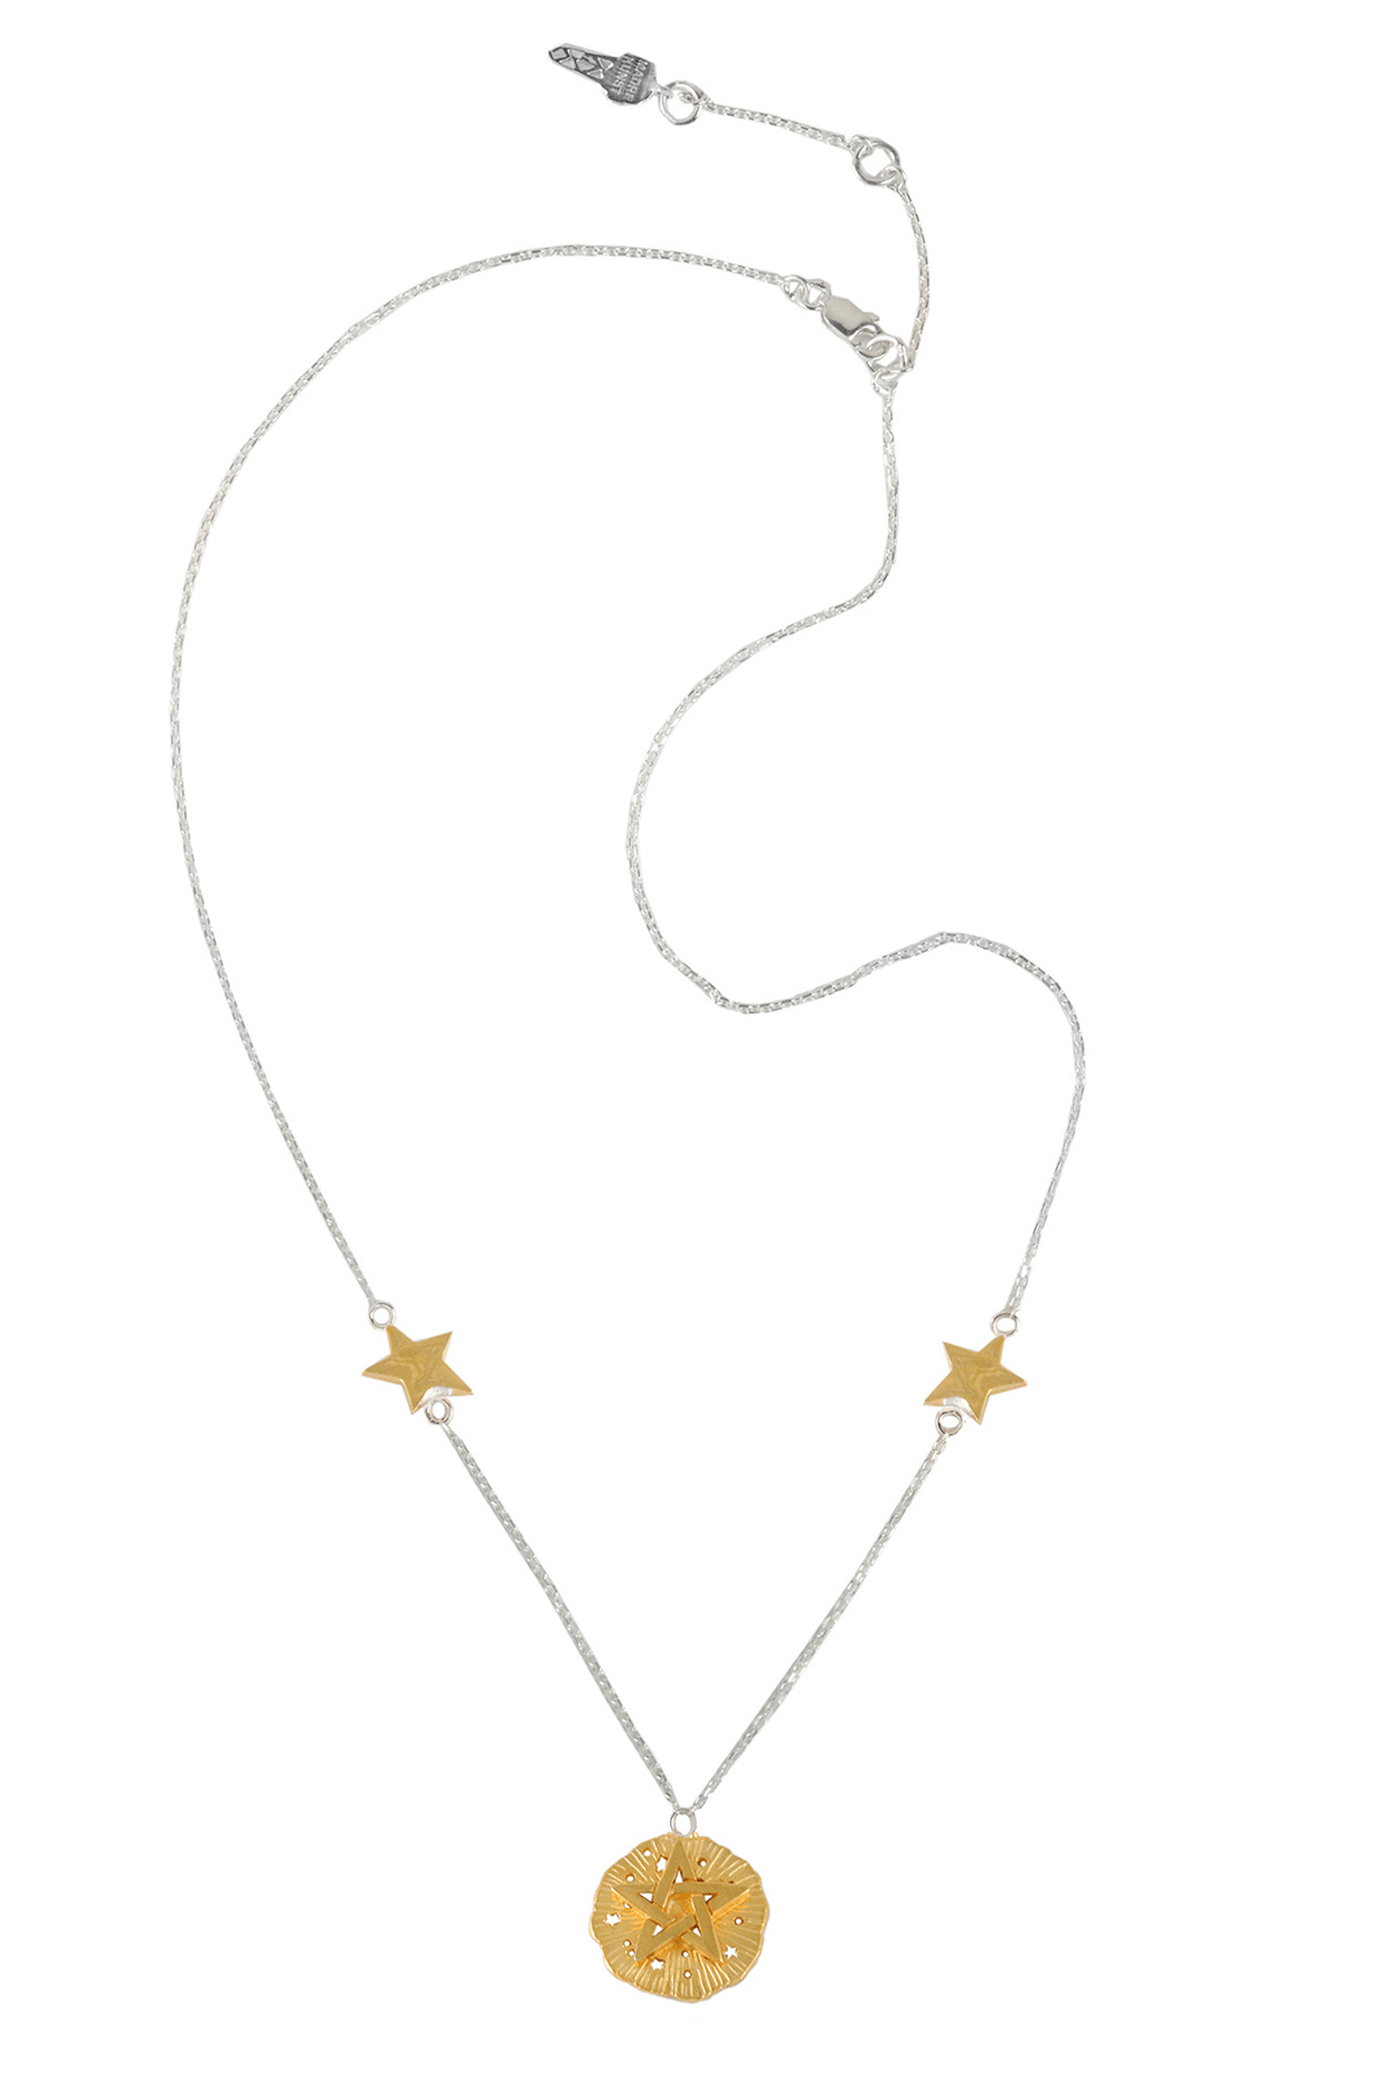 Chain necklace with small pentagram medallion and 2 stars on the chain, 46 cm, partly silver, gold plated